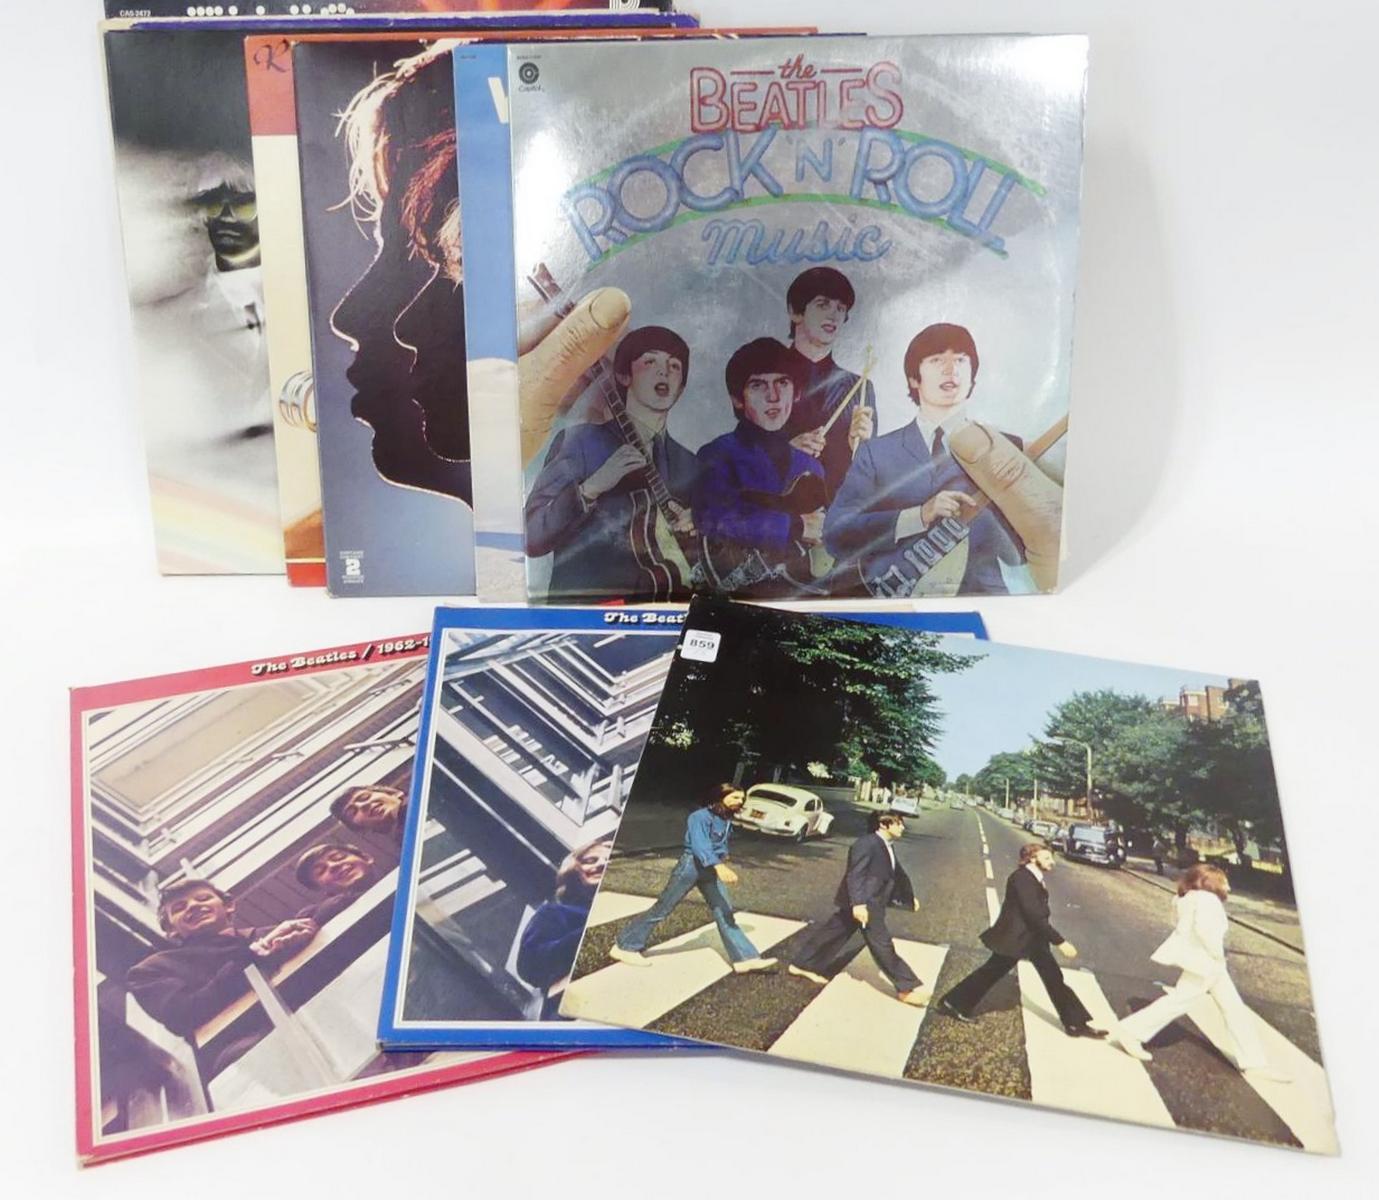 BEATLES, ROLLING STONES AND ELVIS RECORDS